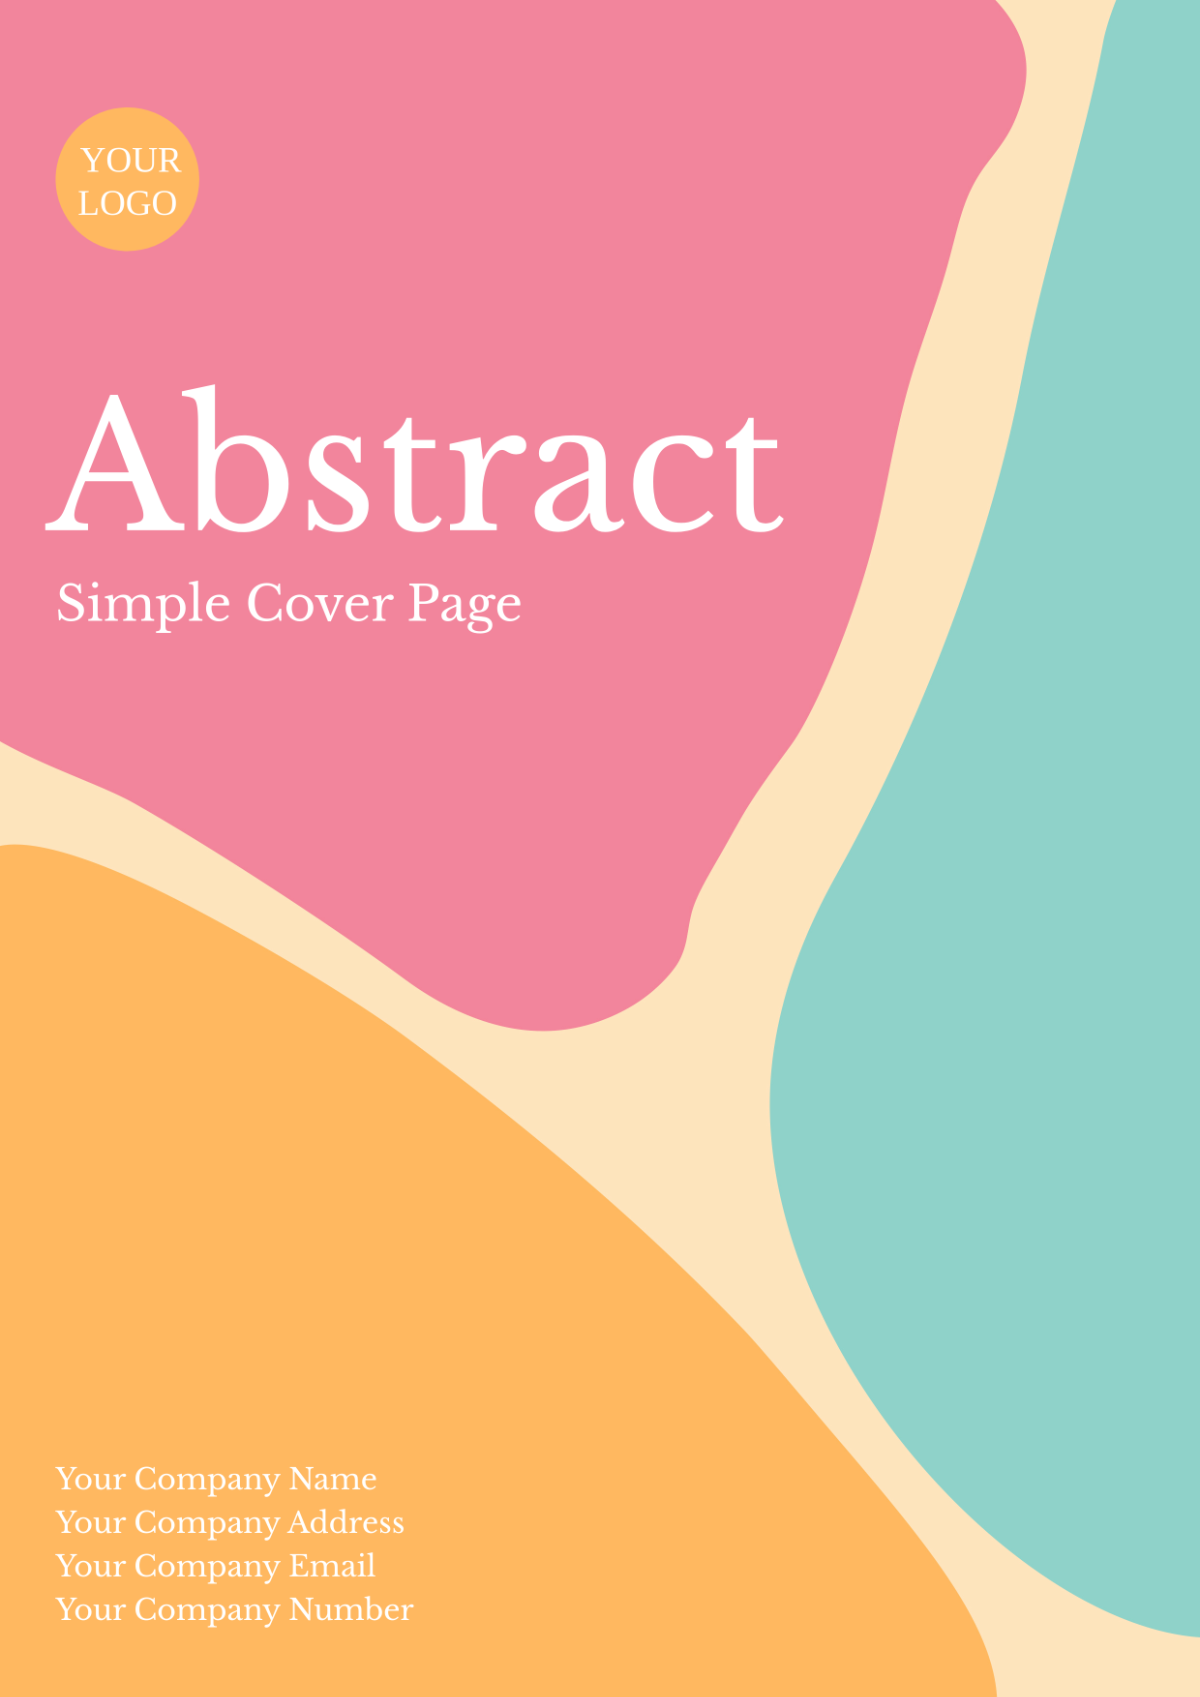 Abstract Simple Cover Page